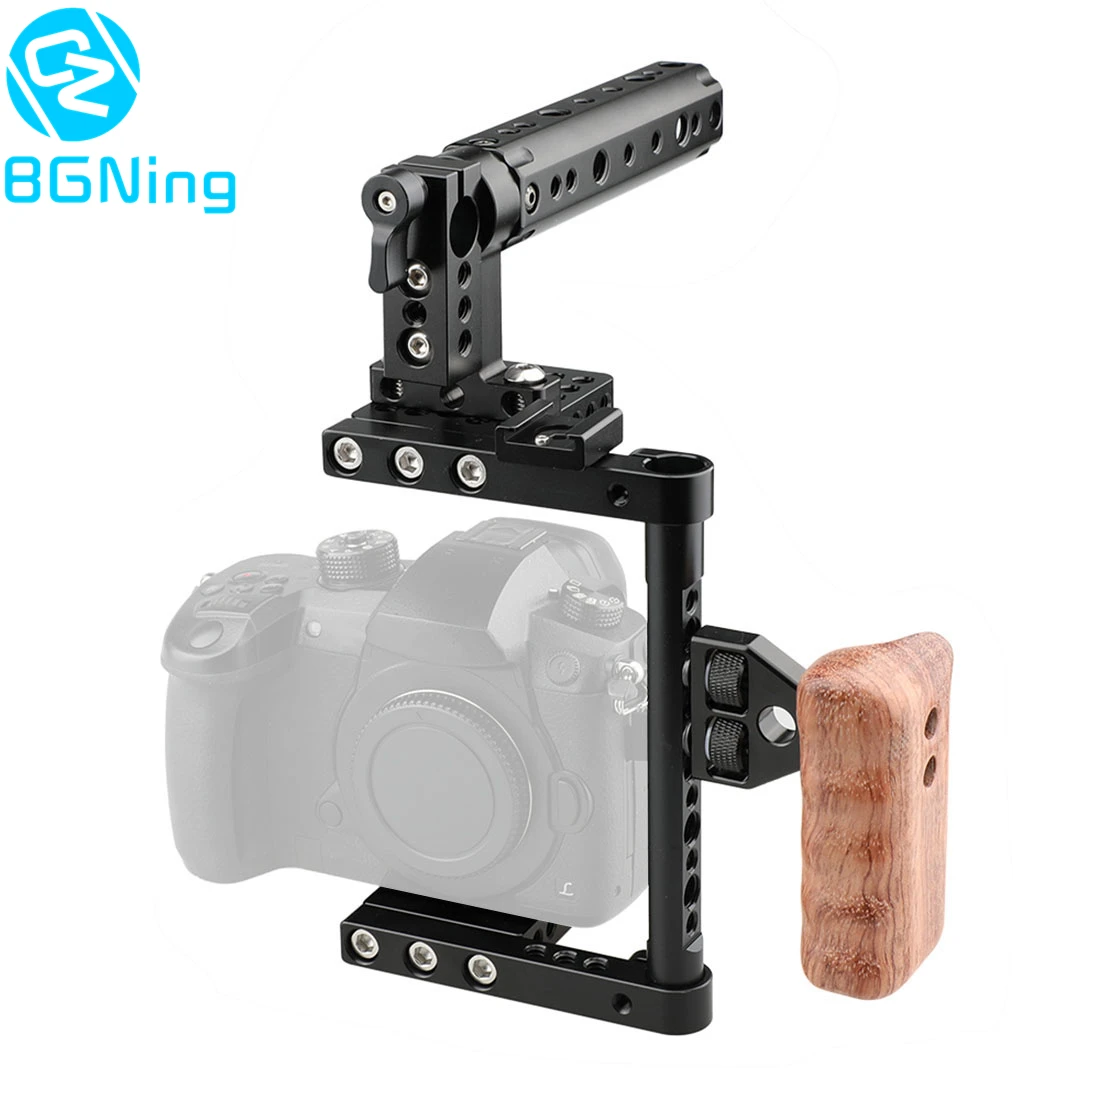 

BGNing Camera Cage Rig Top Handle Tripod Mount Plate for Canon 60D for Nikon for Sony for Panasonnic GH5 GH4 Left hand Wood Grip